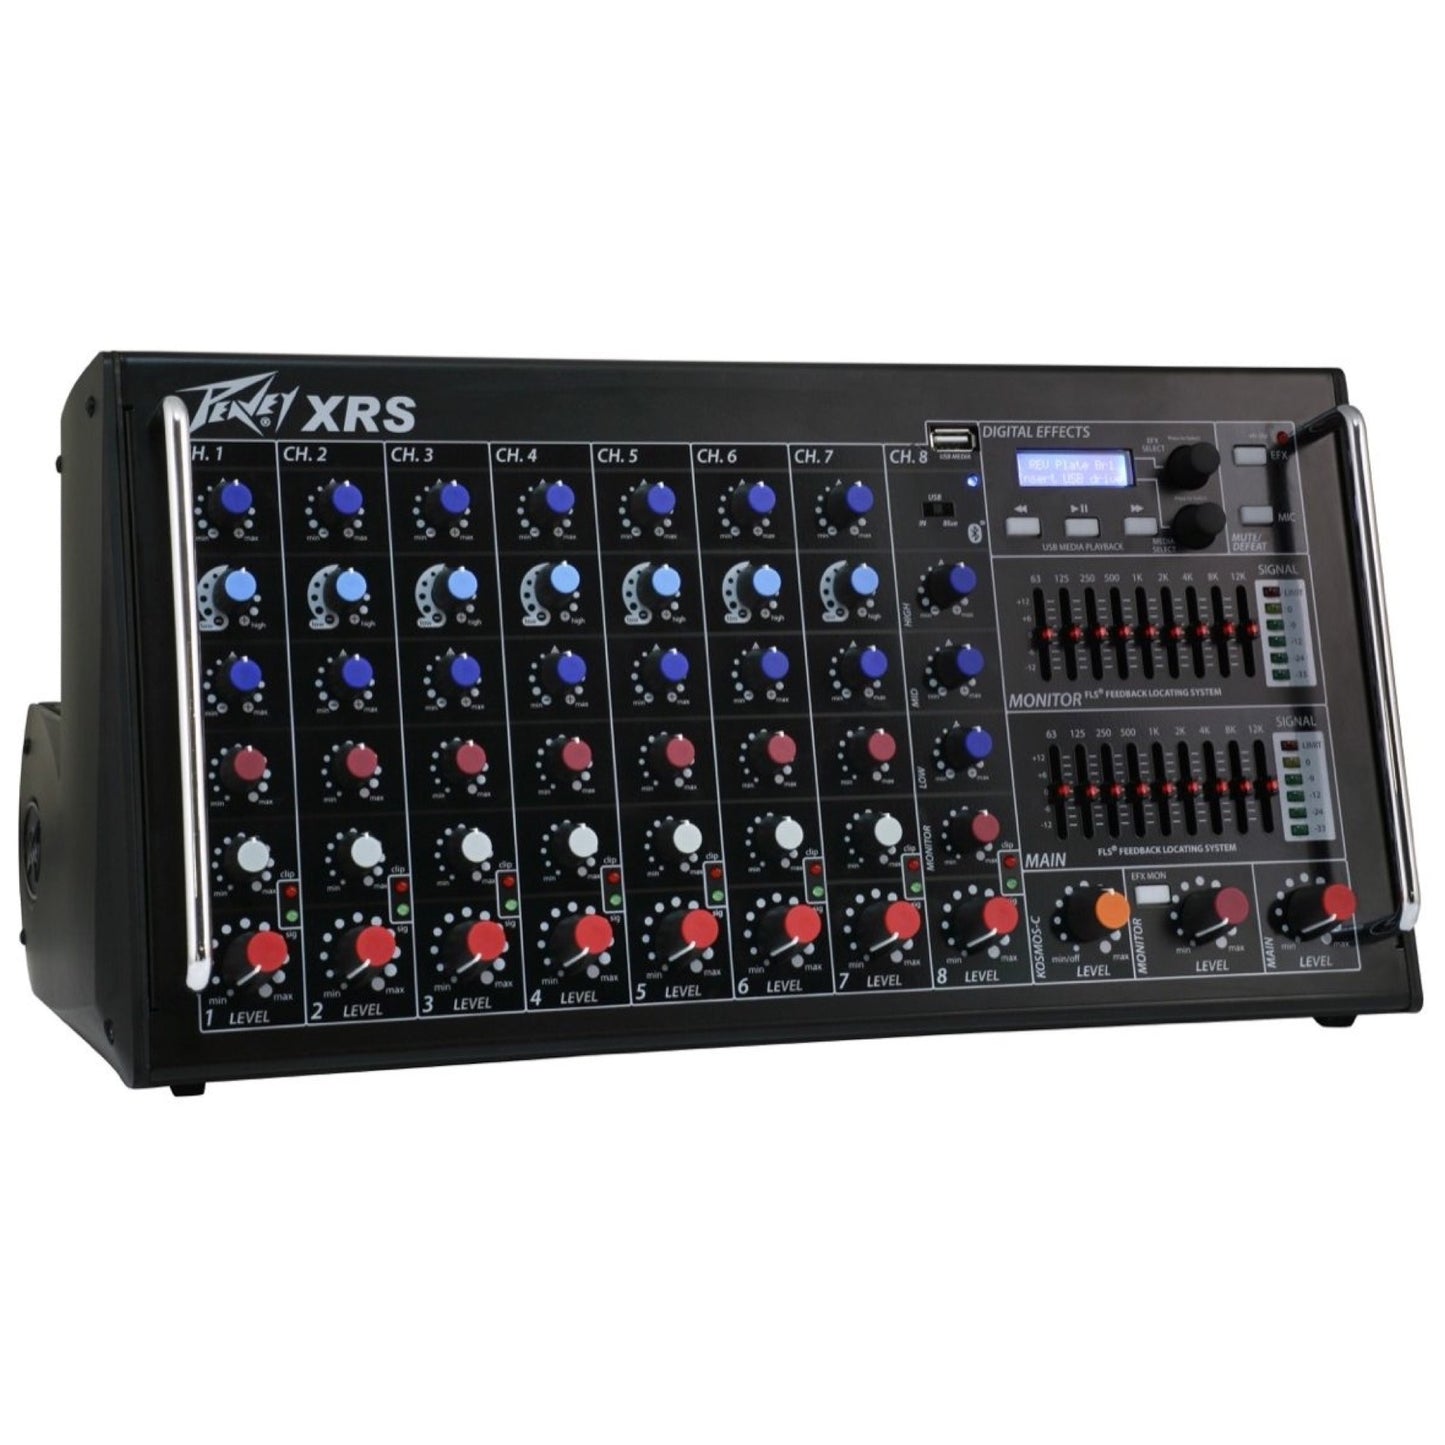 Peavey XR-S Powered Mixer, 8-Channel (1000 Watts)